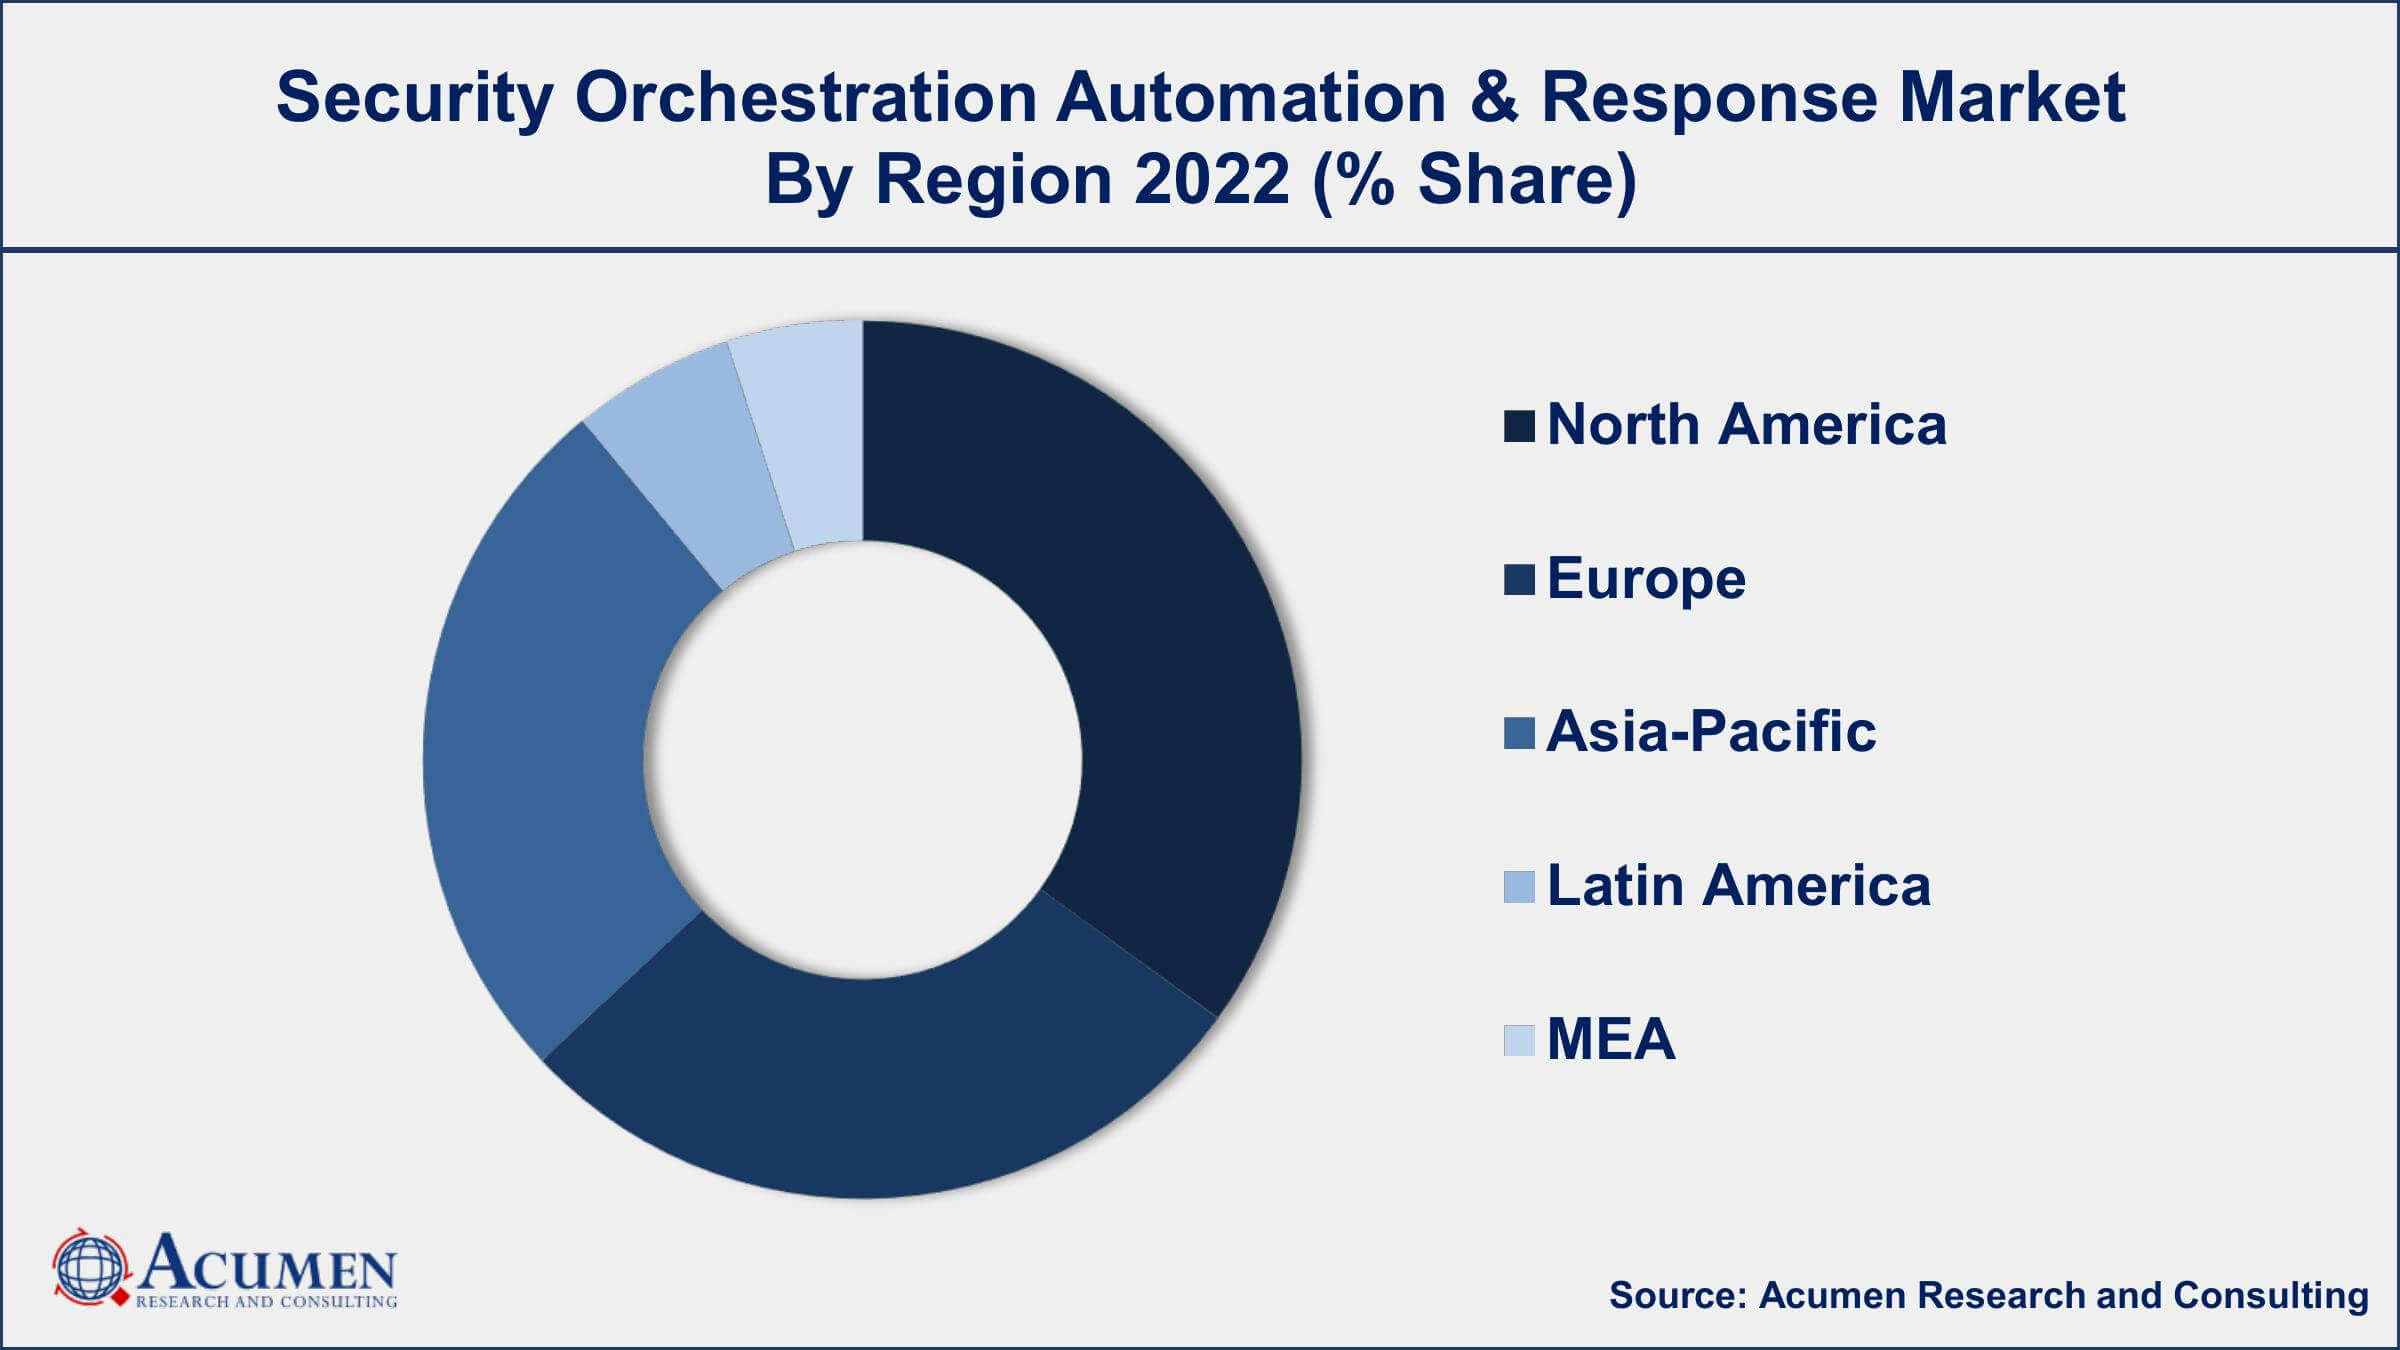 Security Orchestration Automation and Response Market Drivers